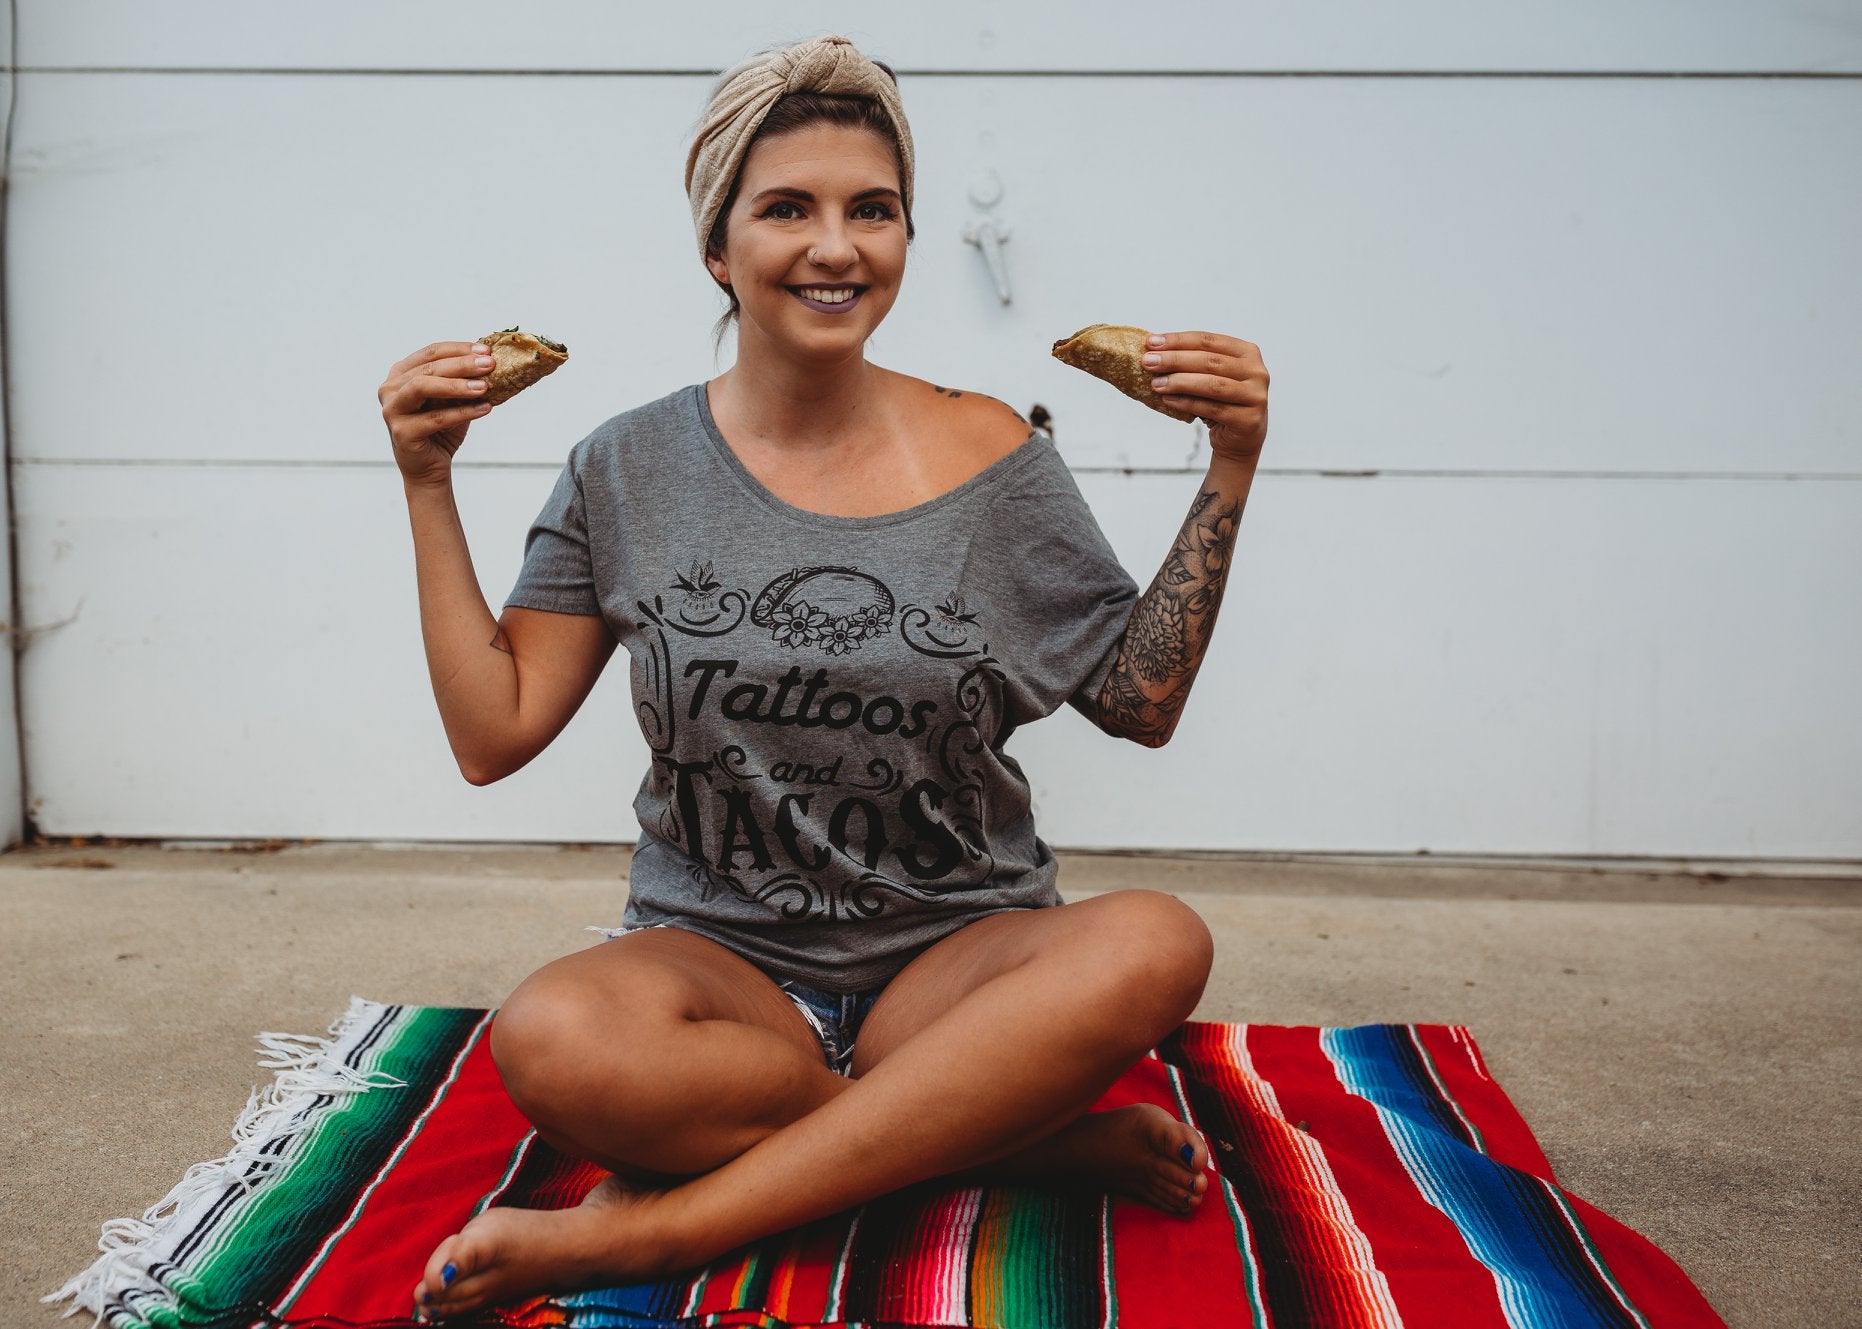 « TATTOOS AND TACOS » SLOUCHY TEE